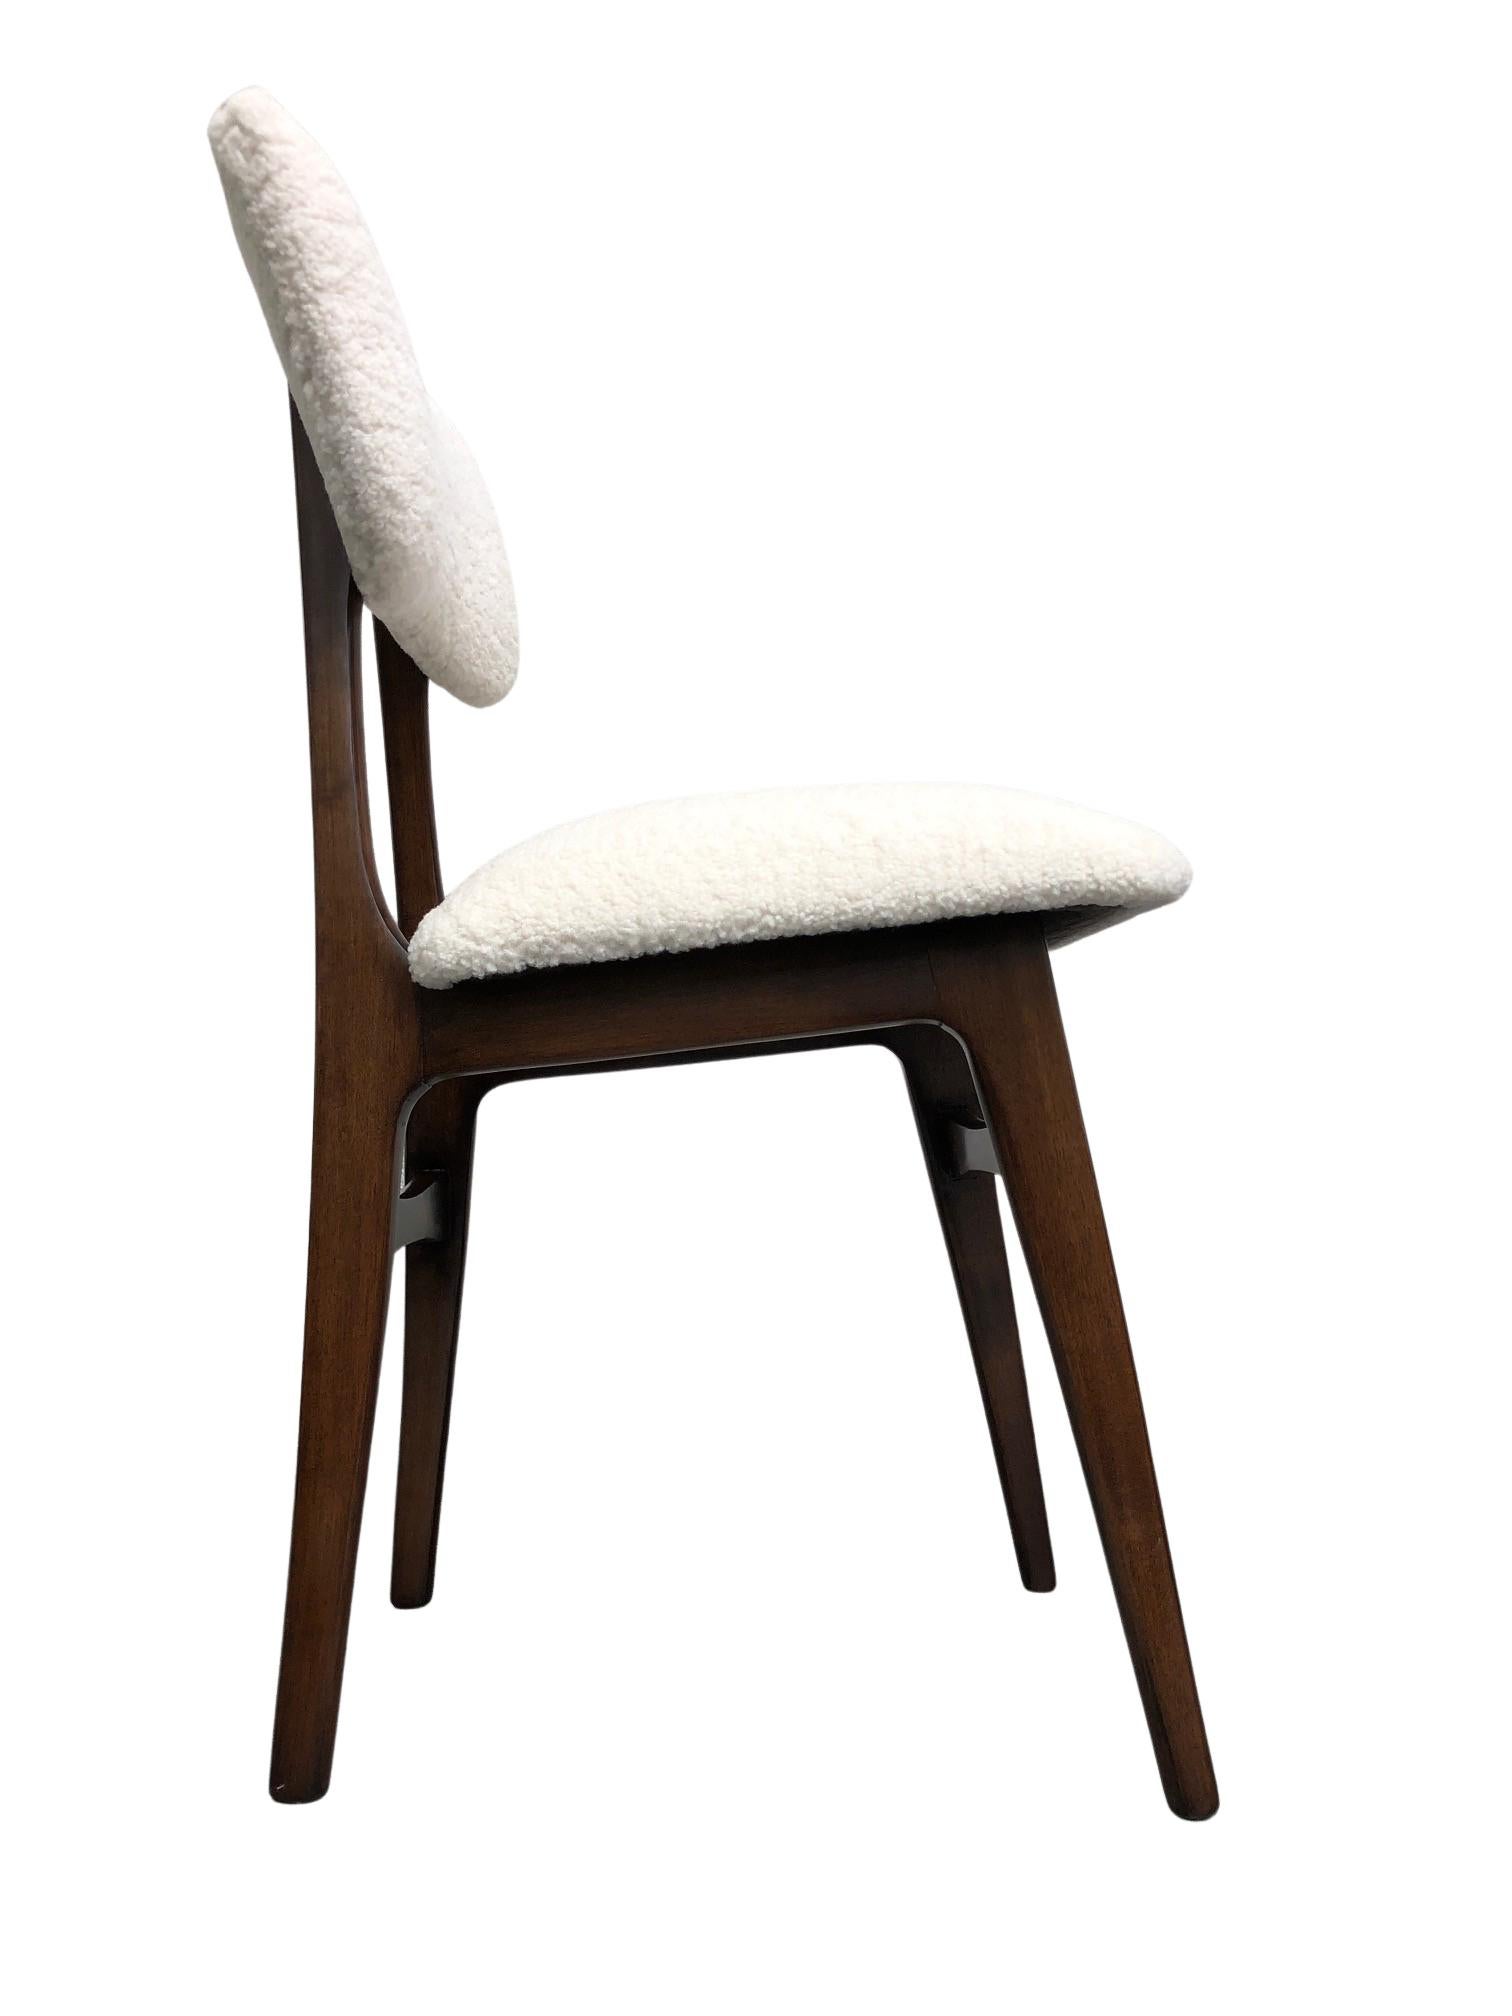 Set of 4 Midcentury Beige Bouclé Dining Chairs, Europe, 1960s For Sale 1